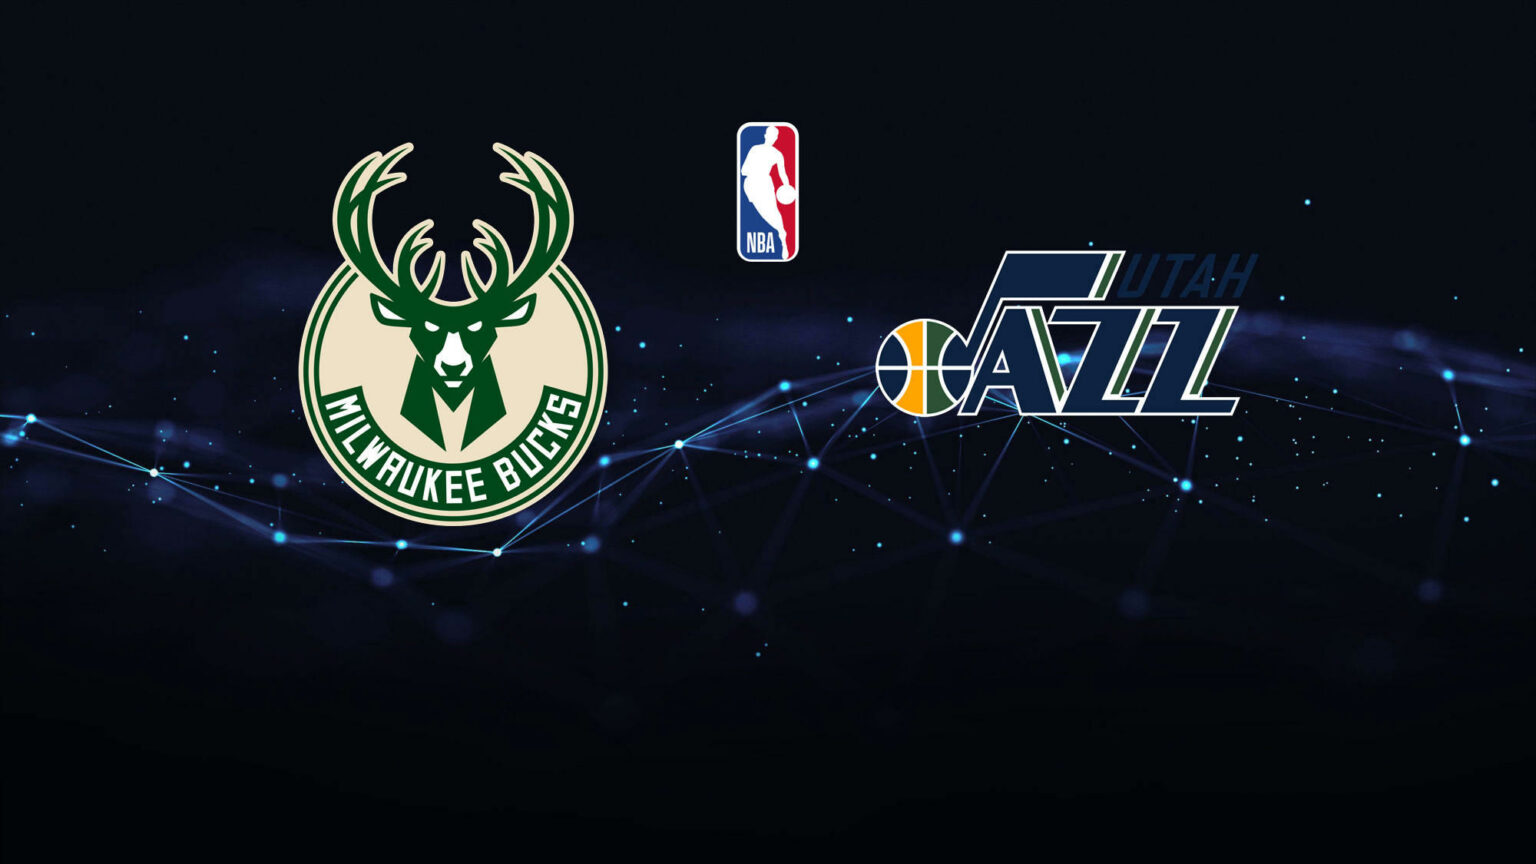 How to Live Stream the Bucks vs. Jazz Game Free, TV Channel Info, Game Time - Saturday, December 17, 2022